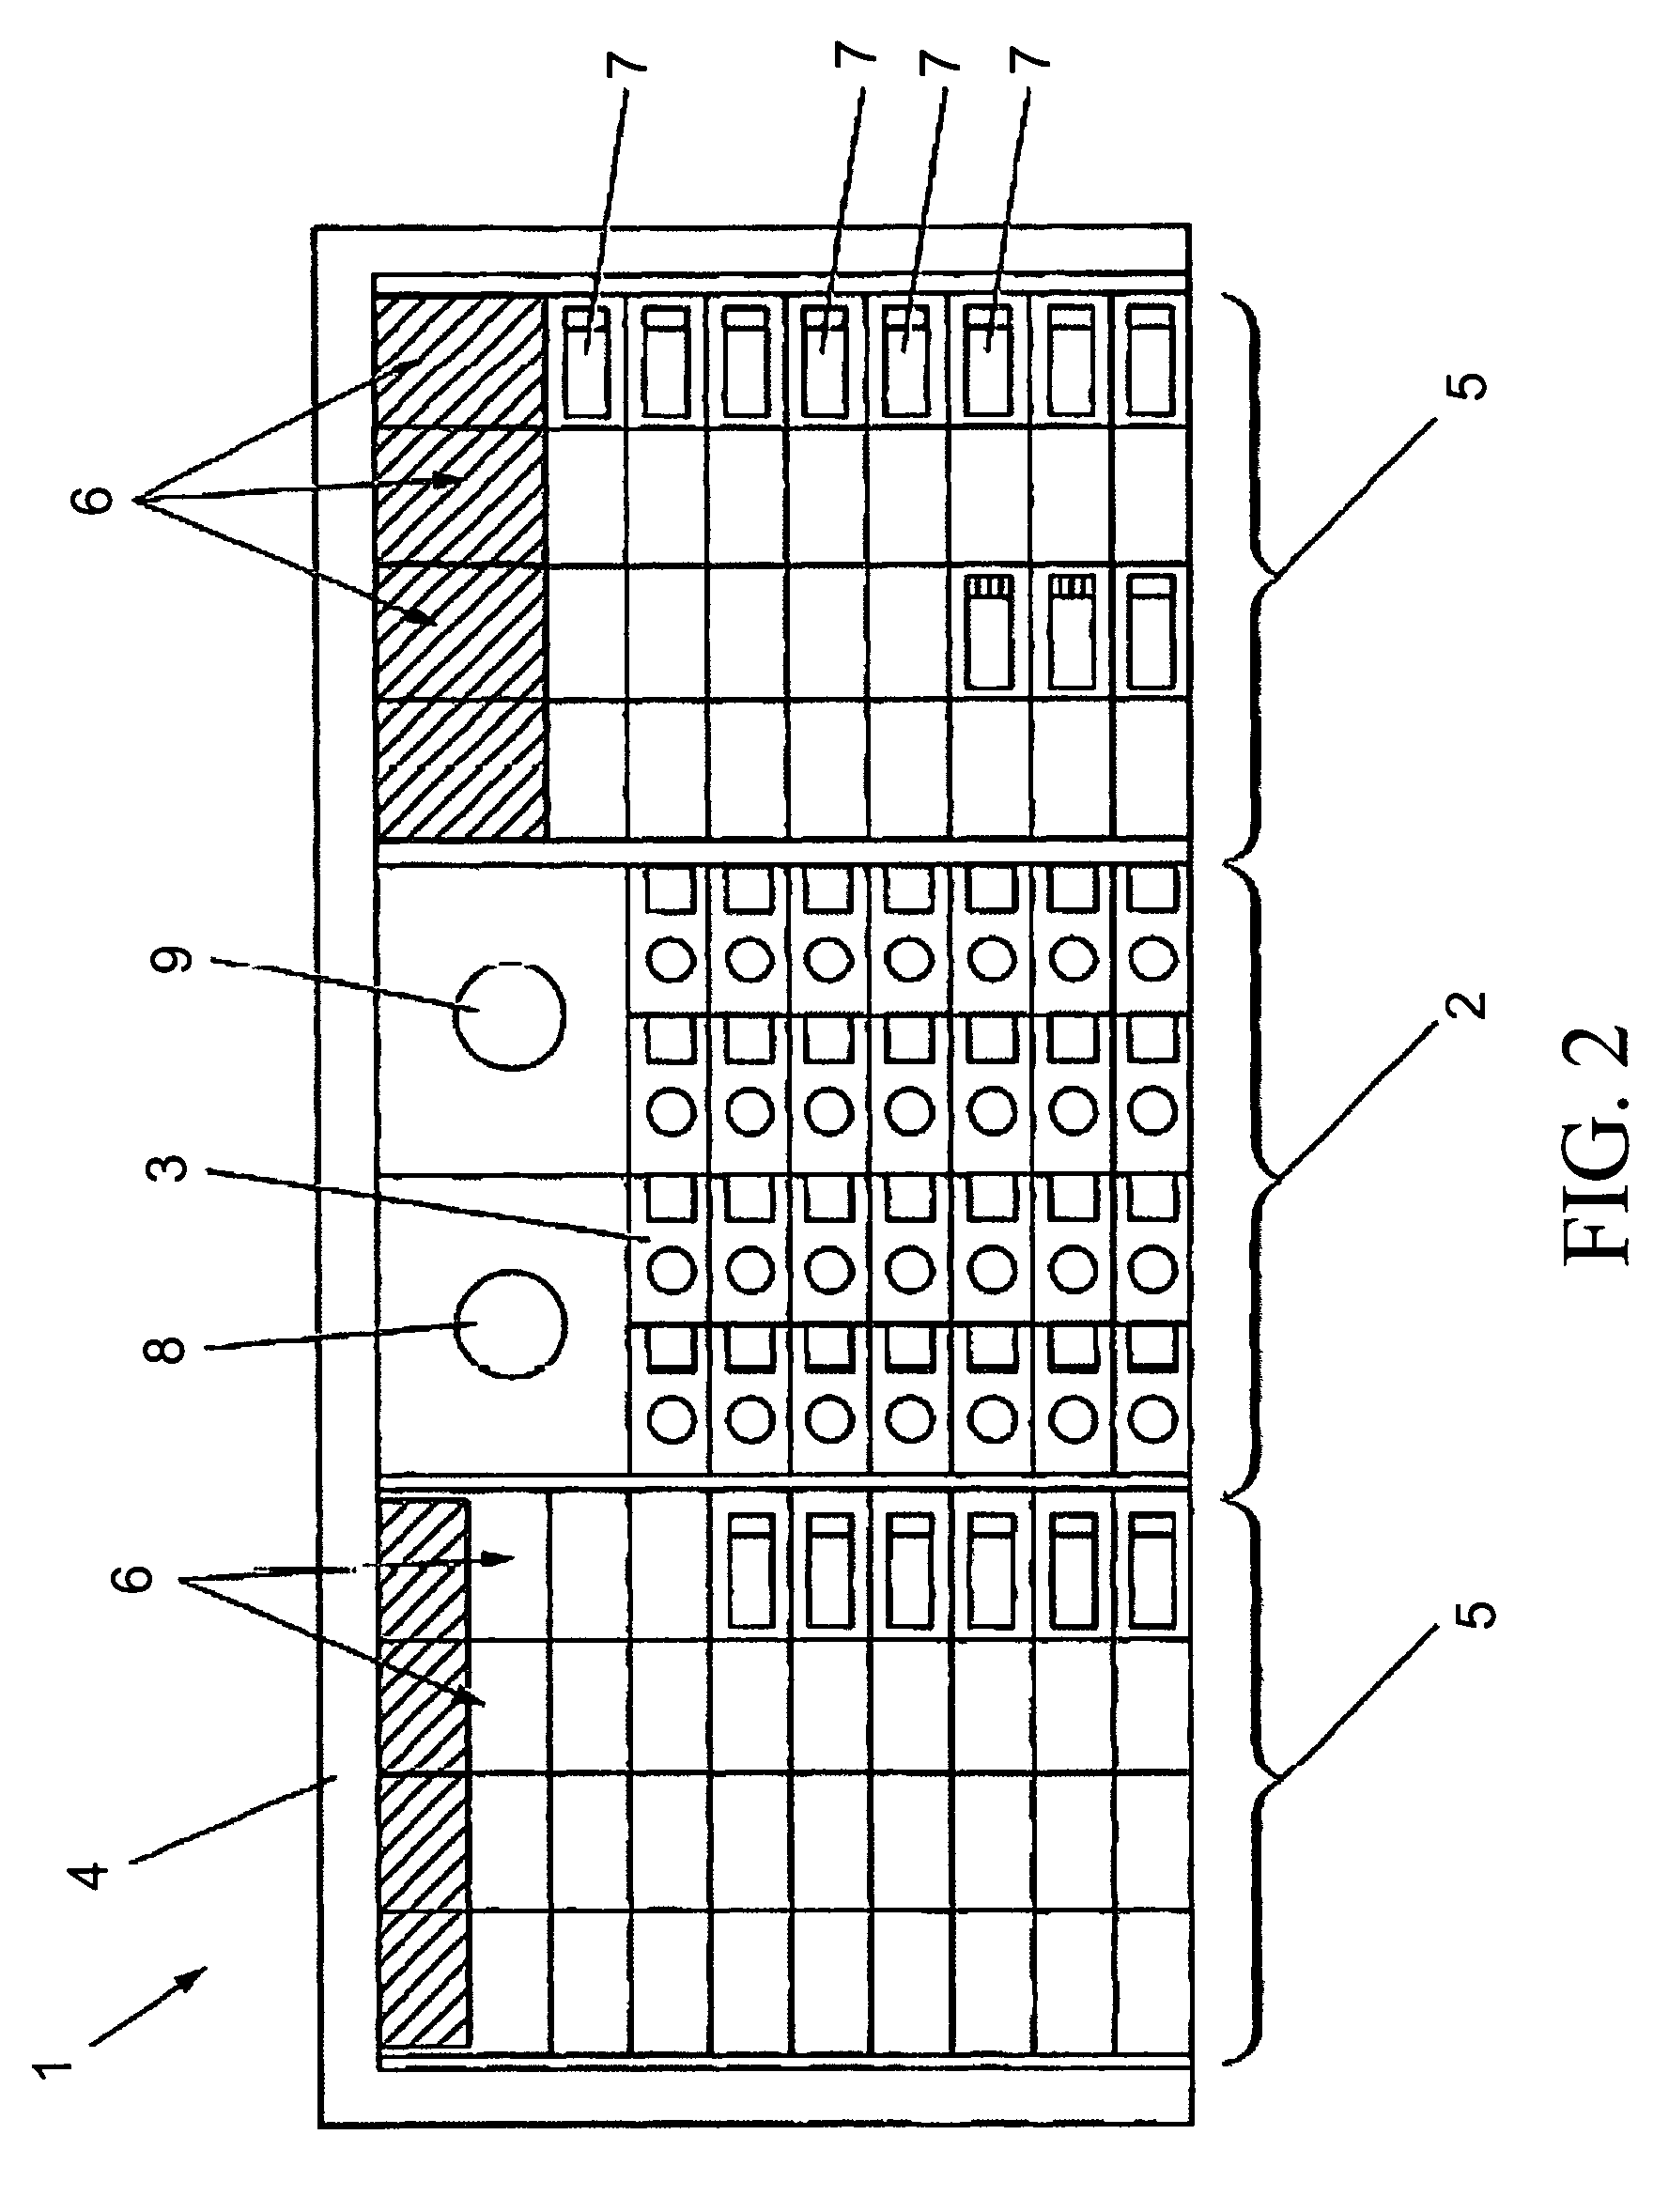 Method and apparatus for automated pre-treatment and processing of biological samples